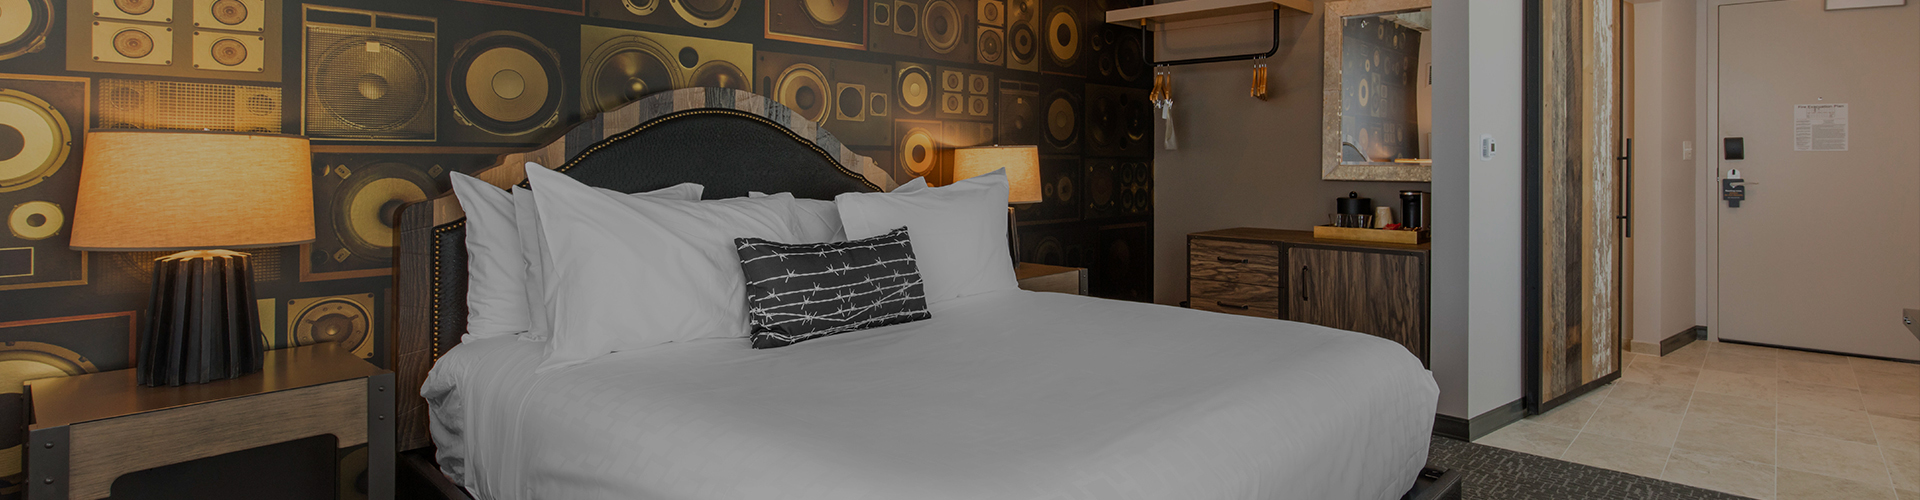 Closeup view of modish hotel room during the night with features as, radio style wall, two nightstands, lamps